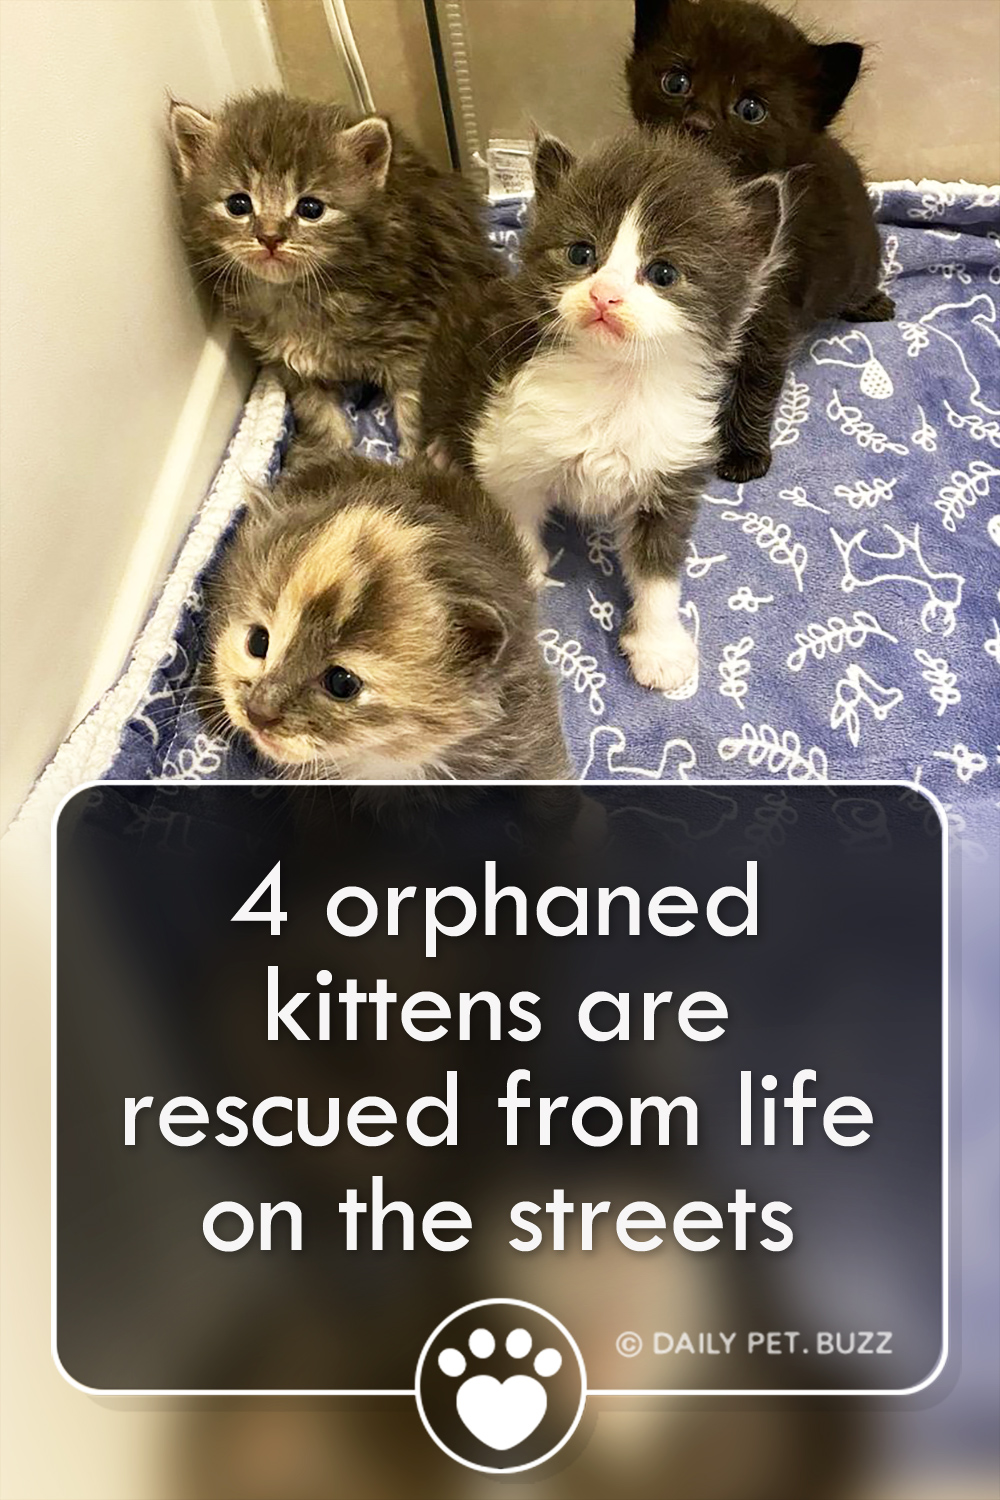 4 orphaned kittens are rescued from life on the streets